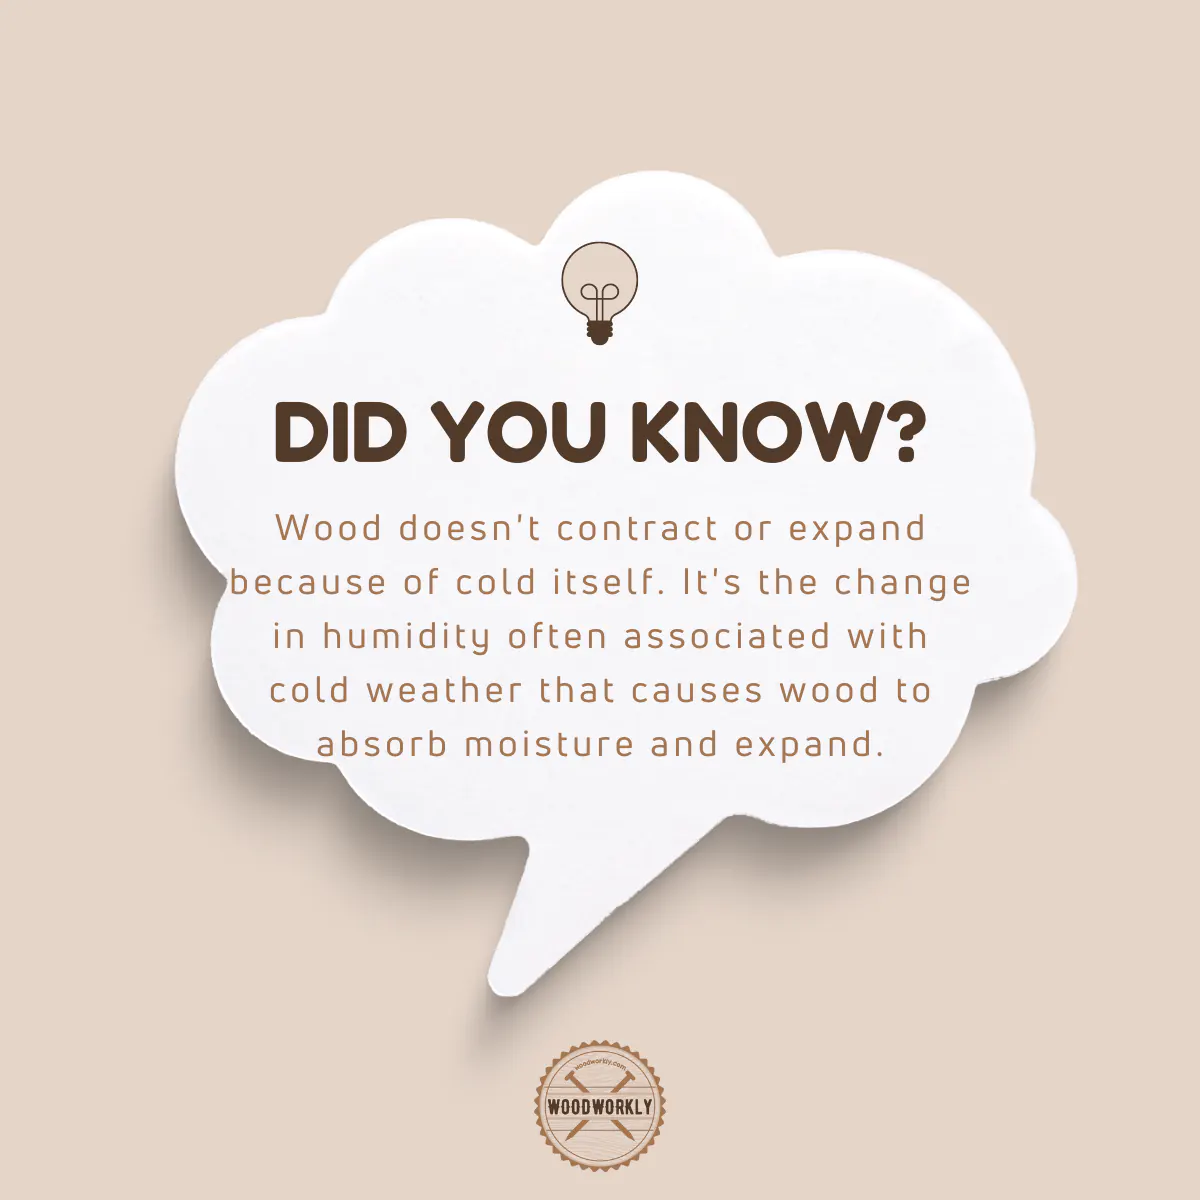 Did you know fact about Wood expansions and Contractions in Cold